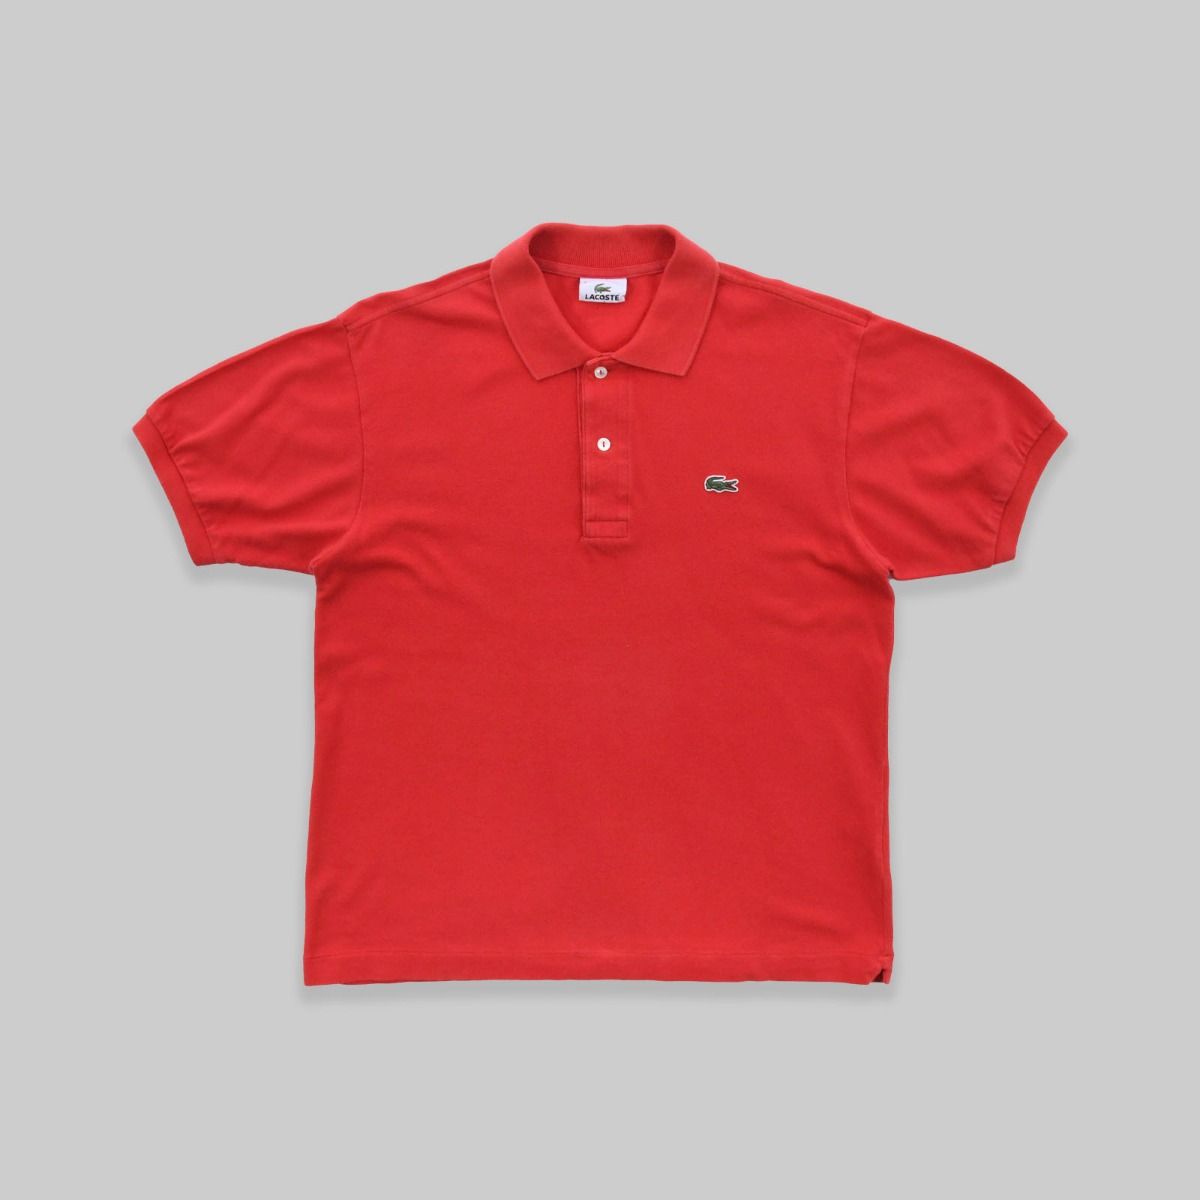 Lacoste Polo Red Shirt